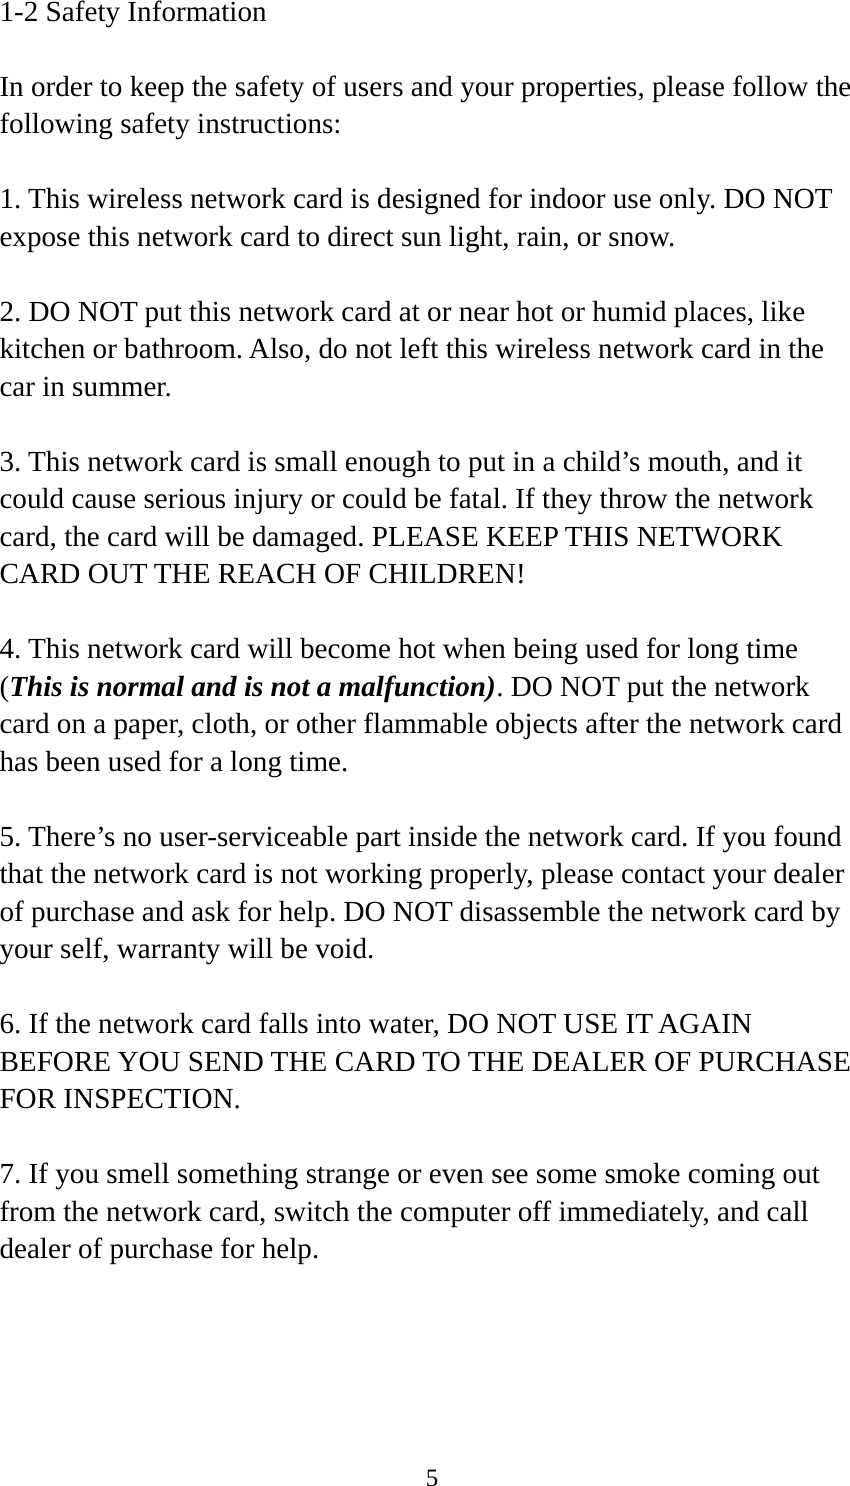  51-2 Safety Information  In order to keep the safety of users and your properties, please follow the following safety instructions:  1. This wireless network card is designed for indoor use only. DO NOT expose this network card to direct sun light, rain, or snow.  2. DO NOT put this network card at or near hot or humid places, like kitchen or bathroom. Also, do not left this wireless network card in the car in summer.  3. This network card is small enough to put in a child’s mouth, and it could cause serious injury or could be fatal. If they throw the network card, the card will be damaged. PLEASE KEEP THIS NETWORK CARD OUT THE REACH OF CHILDREN!  4. This network card will become hot when being used for long time (This is normal and is not a malfunction). DO NOT put the network card on a paper, cloth, or other flammable objects after the network card has been used for a long time.  5. There’s no user-serviceable part inside the network card. If you found that the network card is not working properly, please contact your dealer of purchase and ask for help. DO NOT disassemble the network card by your self, warranty will be void.  6. If the network card falls into water, DO NOT USE IT AGAIN BEFORE YOU SEND THE CARD TO THE DEALER OF PURCHASE FOR INSPECTION.  7. If you smell something strange or even see some smoke coming out from the network card, switch the computer off immediately, and call dealer of purchase for help. 